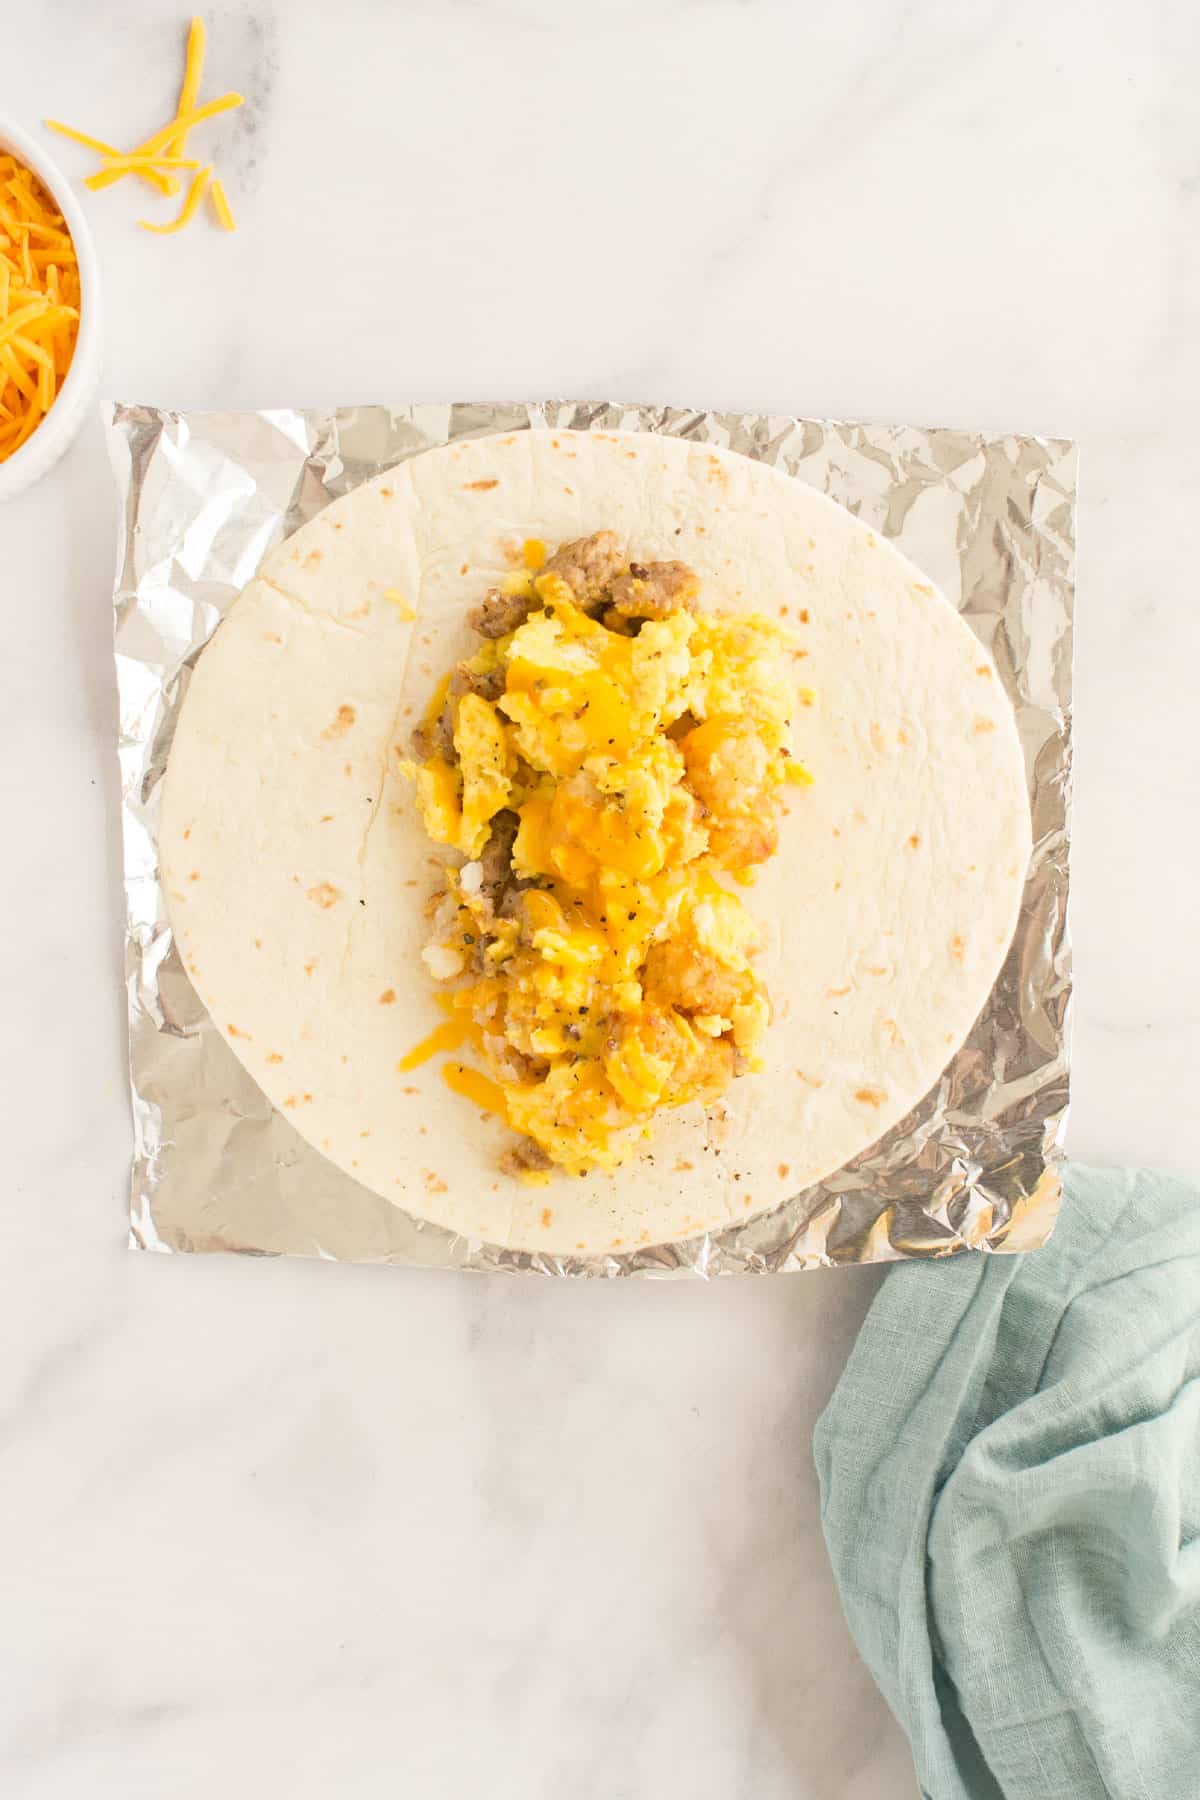 An open breakfast burrito on top of a foil wrapper with a small bowl of shredded cheese on the side.